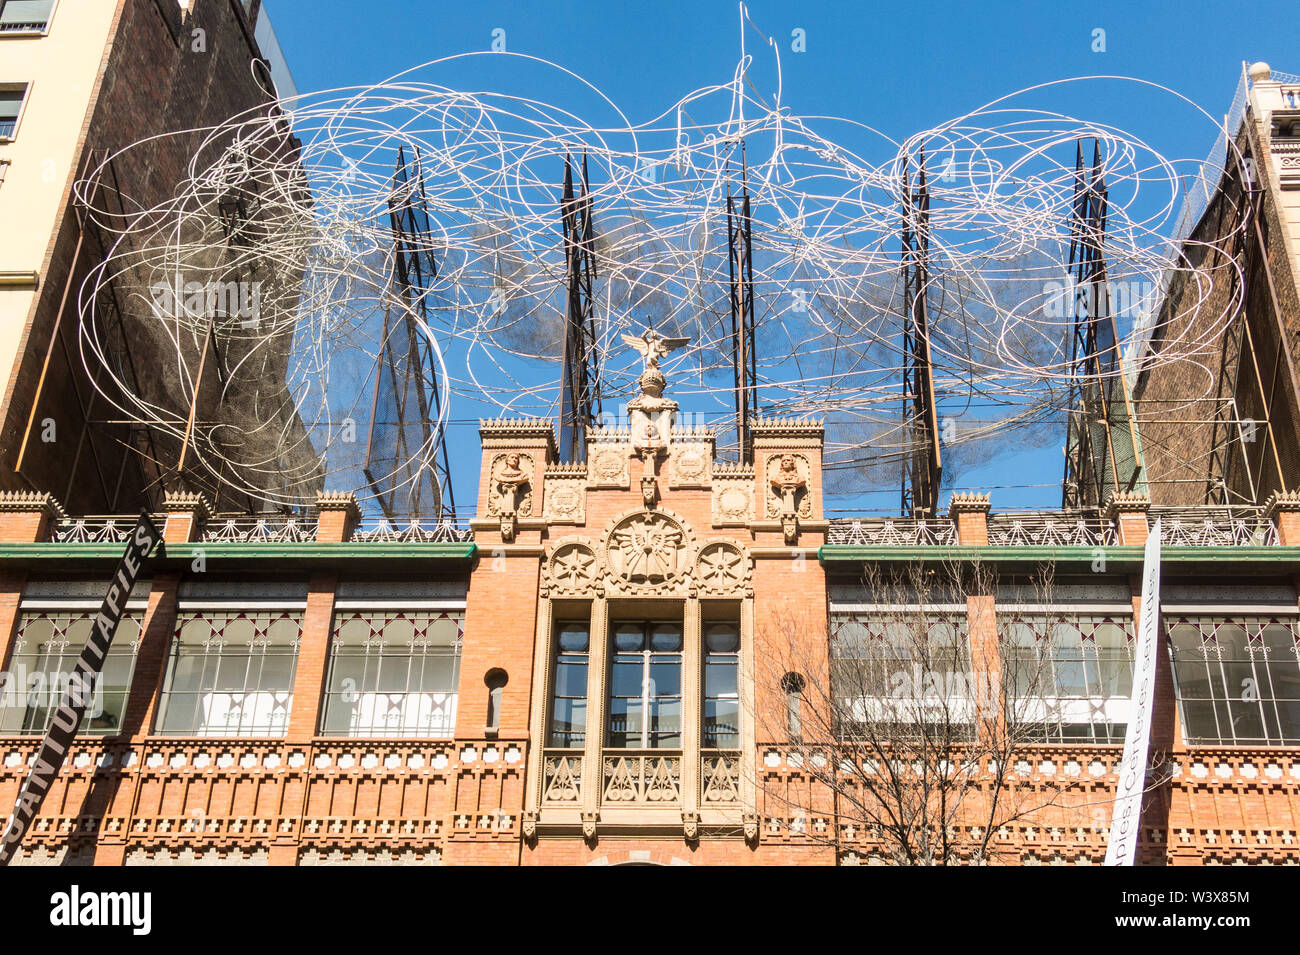 BARCELONA, SPAIN - March 21 2019- View of the Fundacio Antoni Tapies foundation, a cultural center and museum located in Arago Street, in Barcelona, C Stock Photo